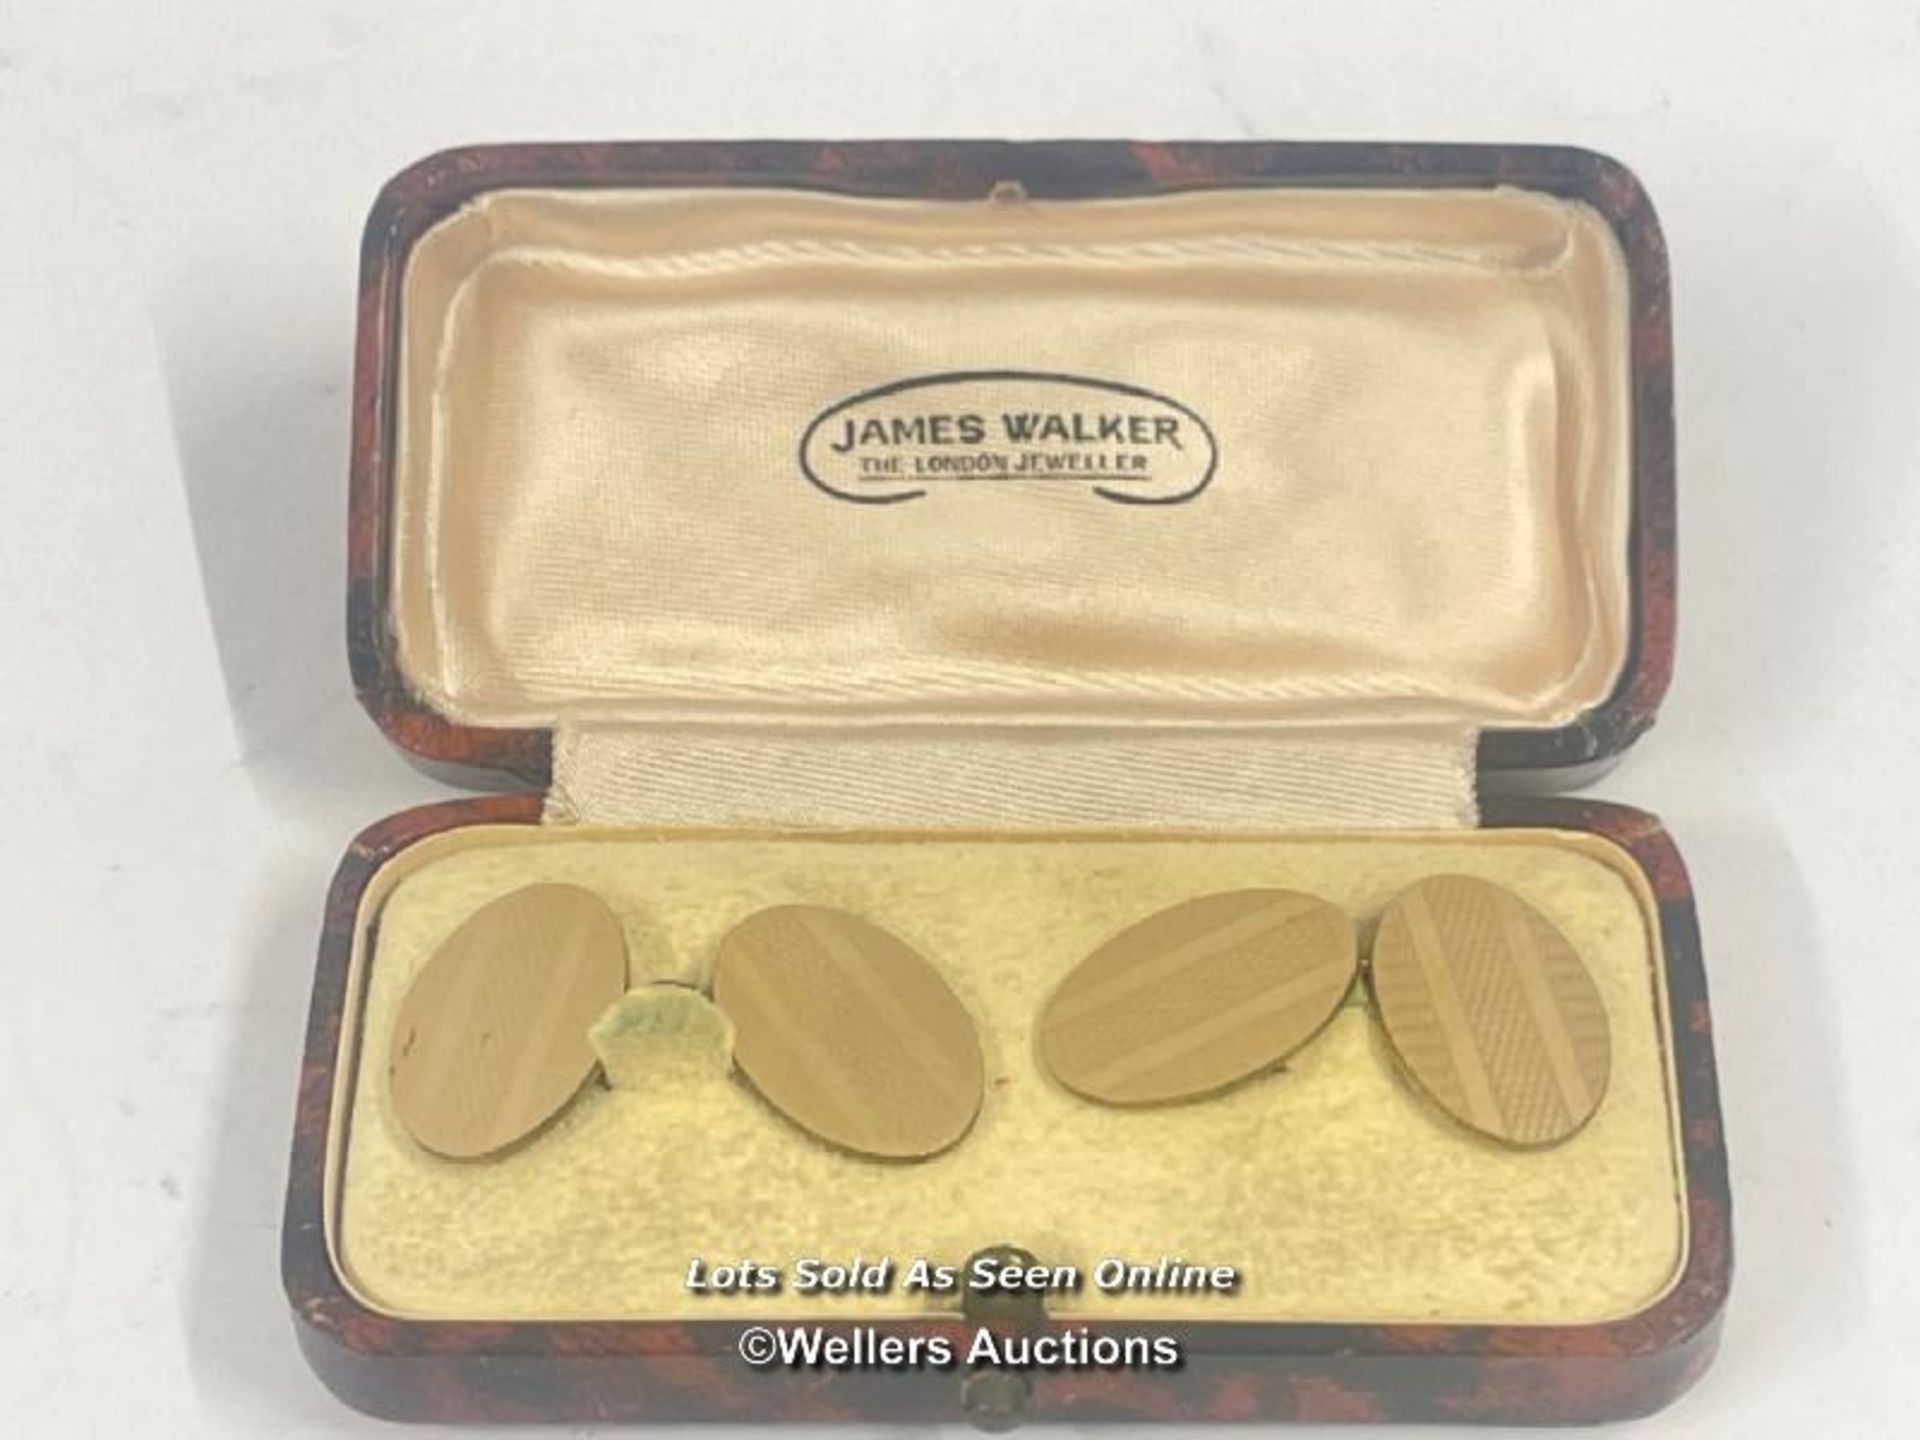 BOXED PAIR OF JAMES WALKER 9CT GOLD FRONT CUFFLINKS